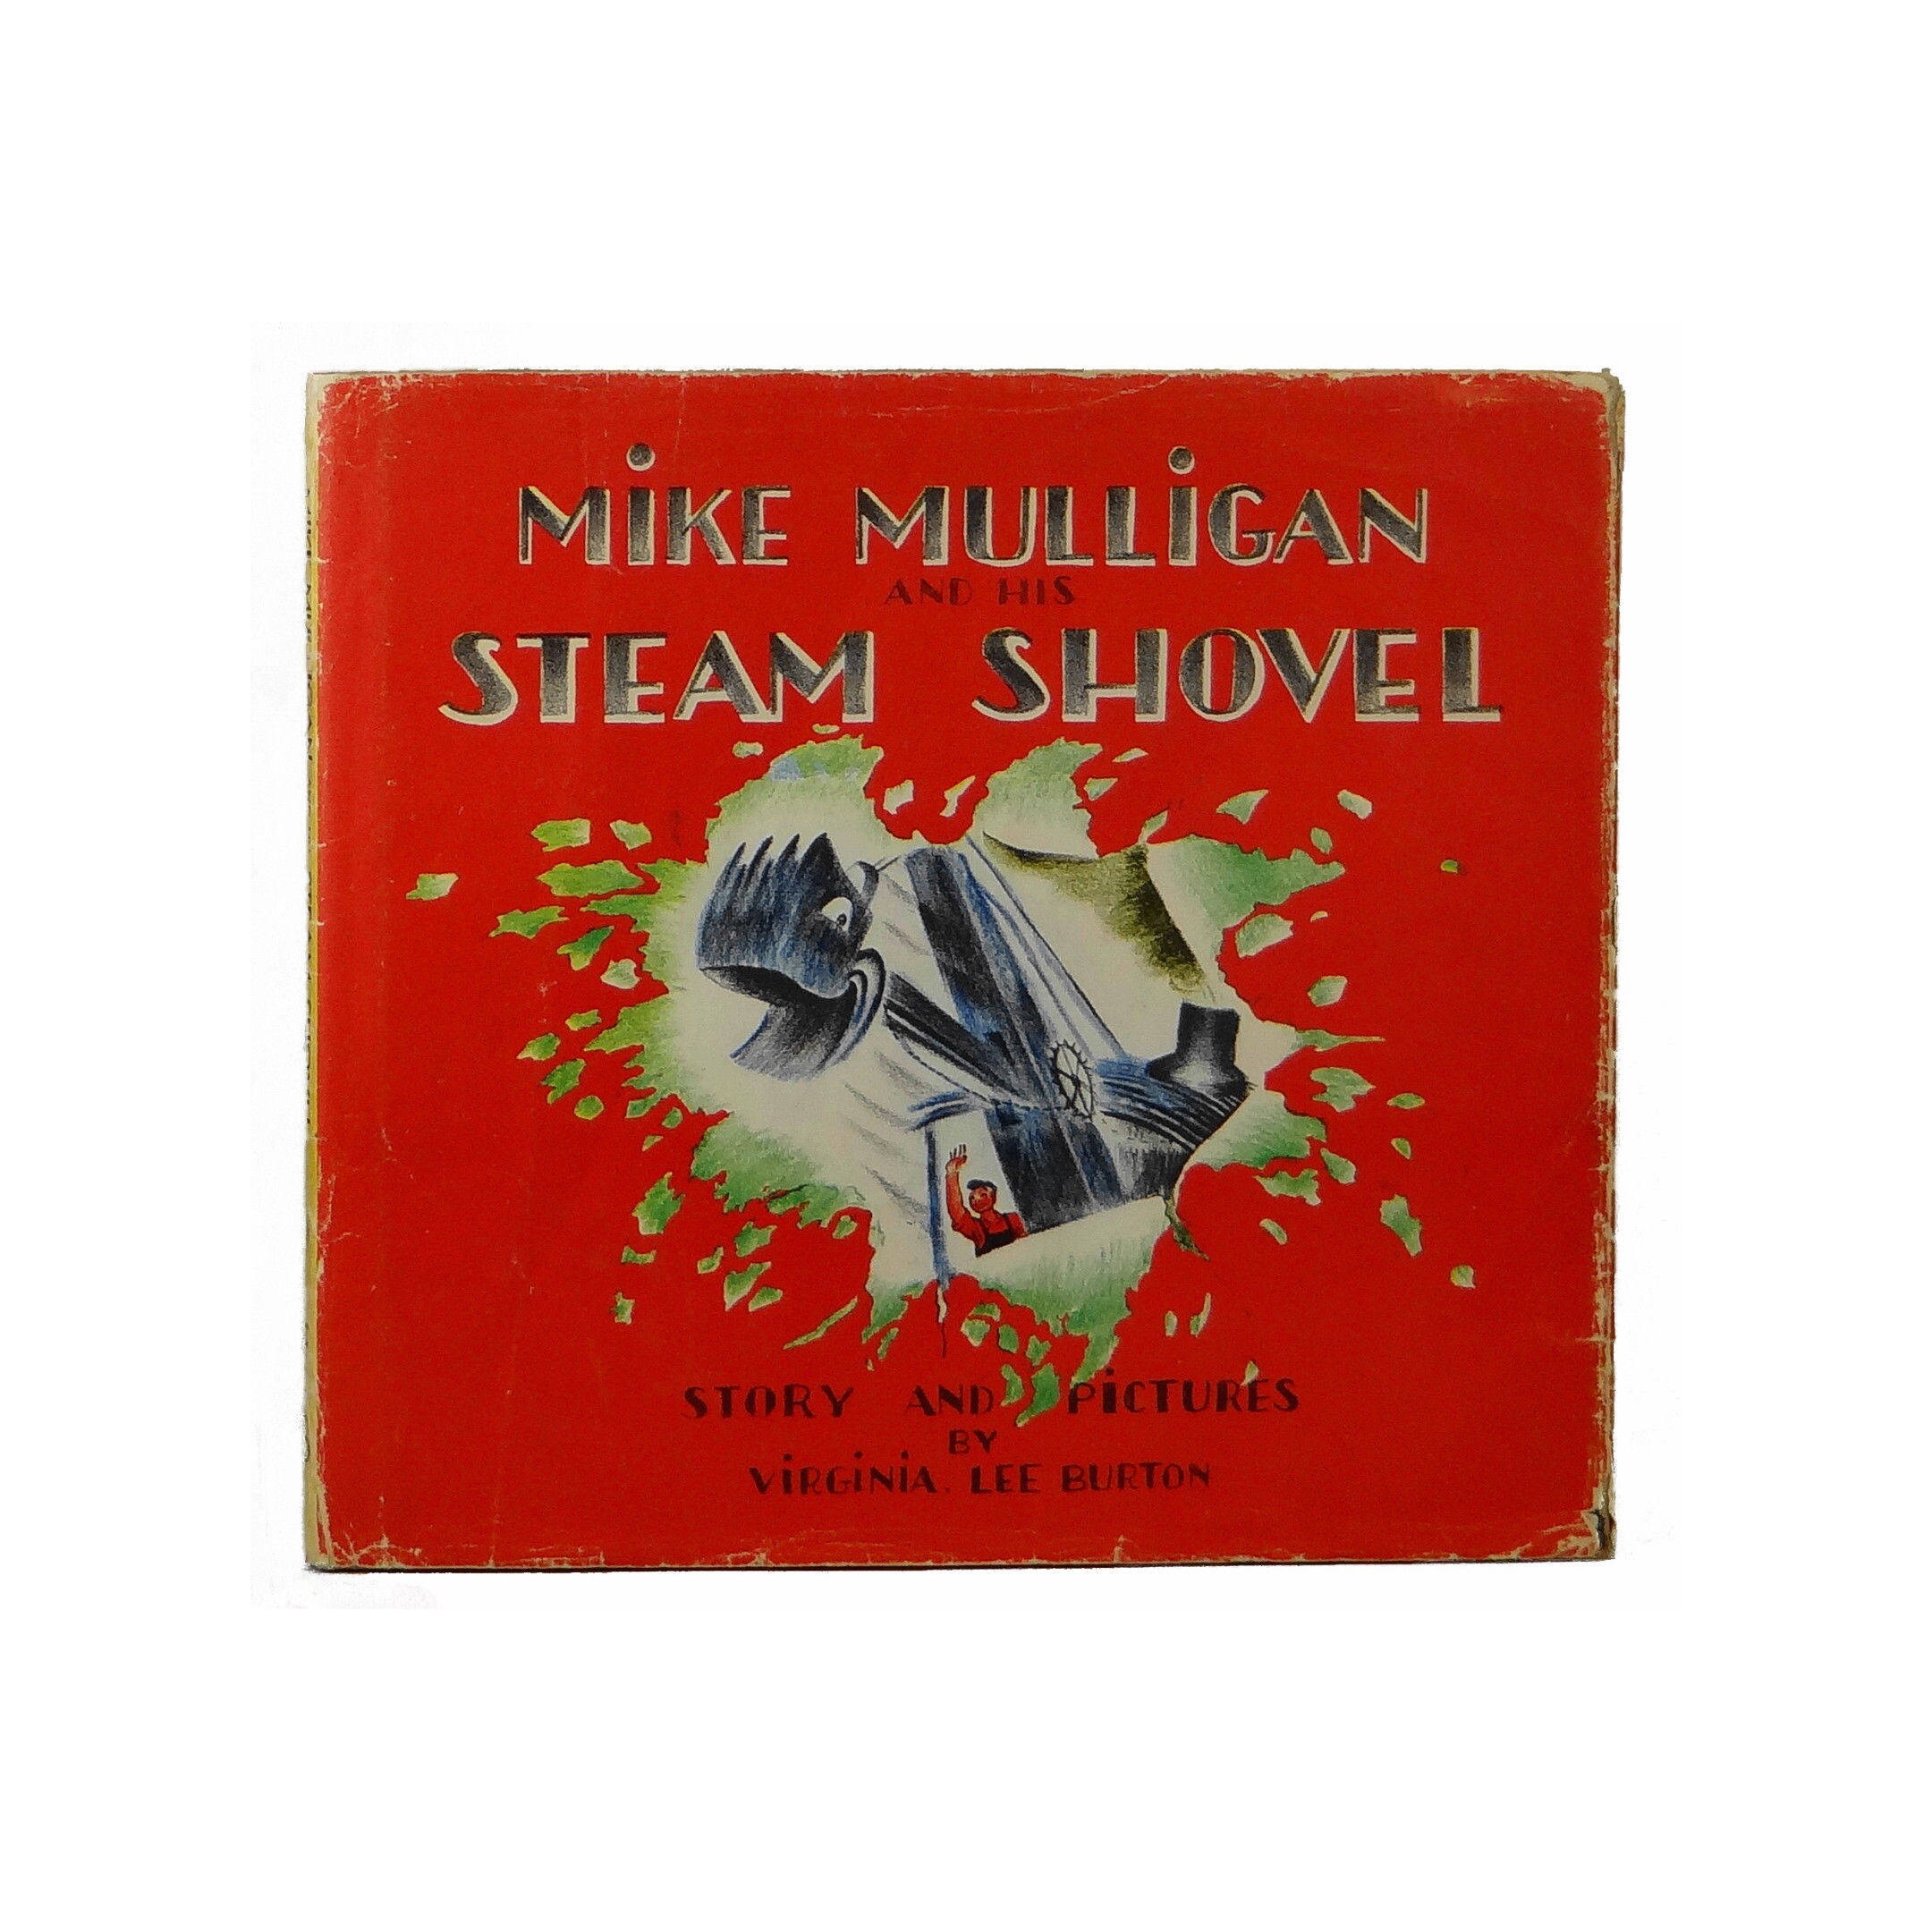 Mike milligan and the steam shovel фото 17